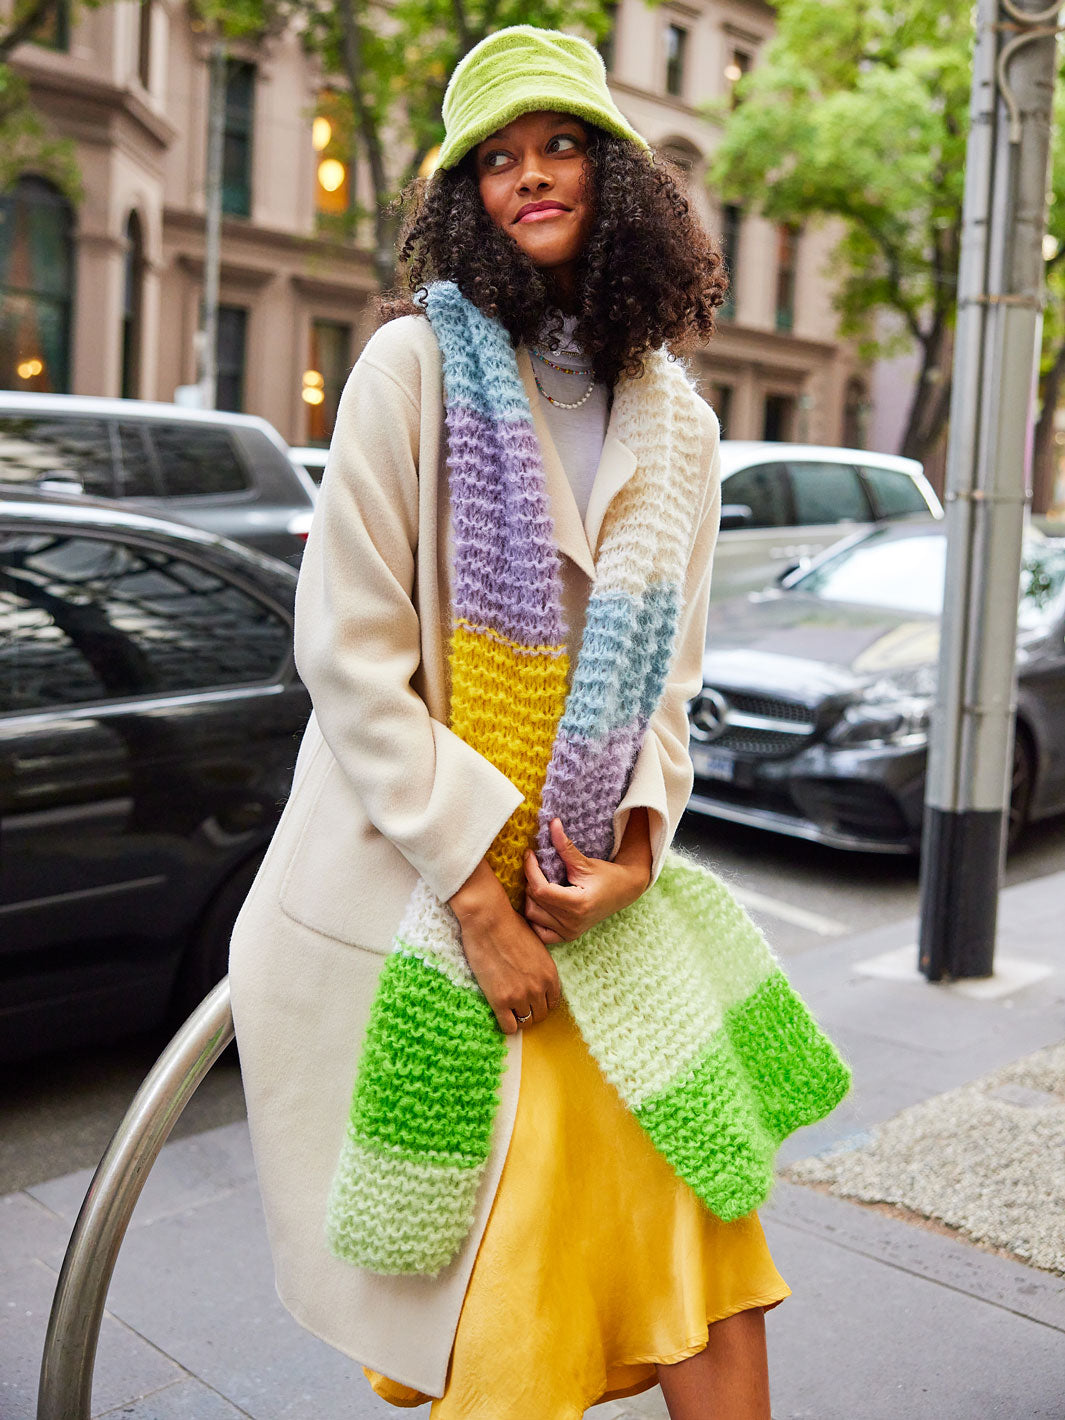 10 Chic City Outfits That Make Dressing for Winter Effortlessly